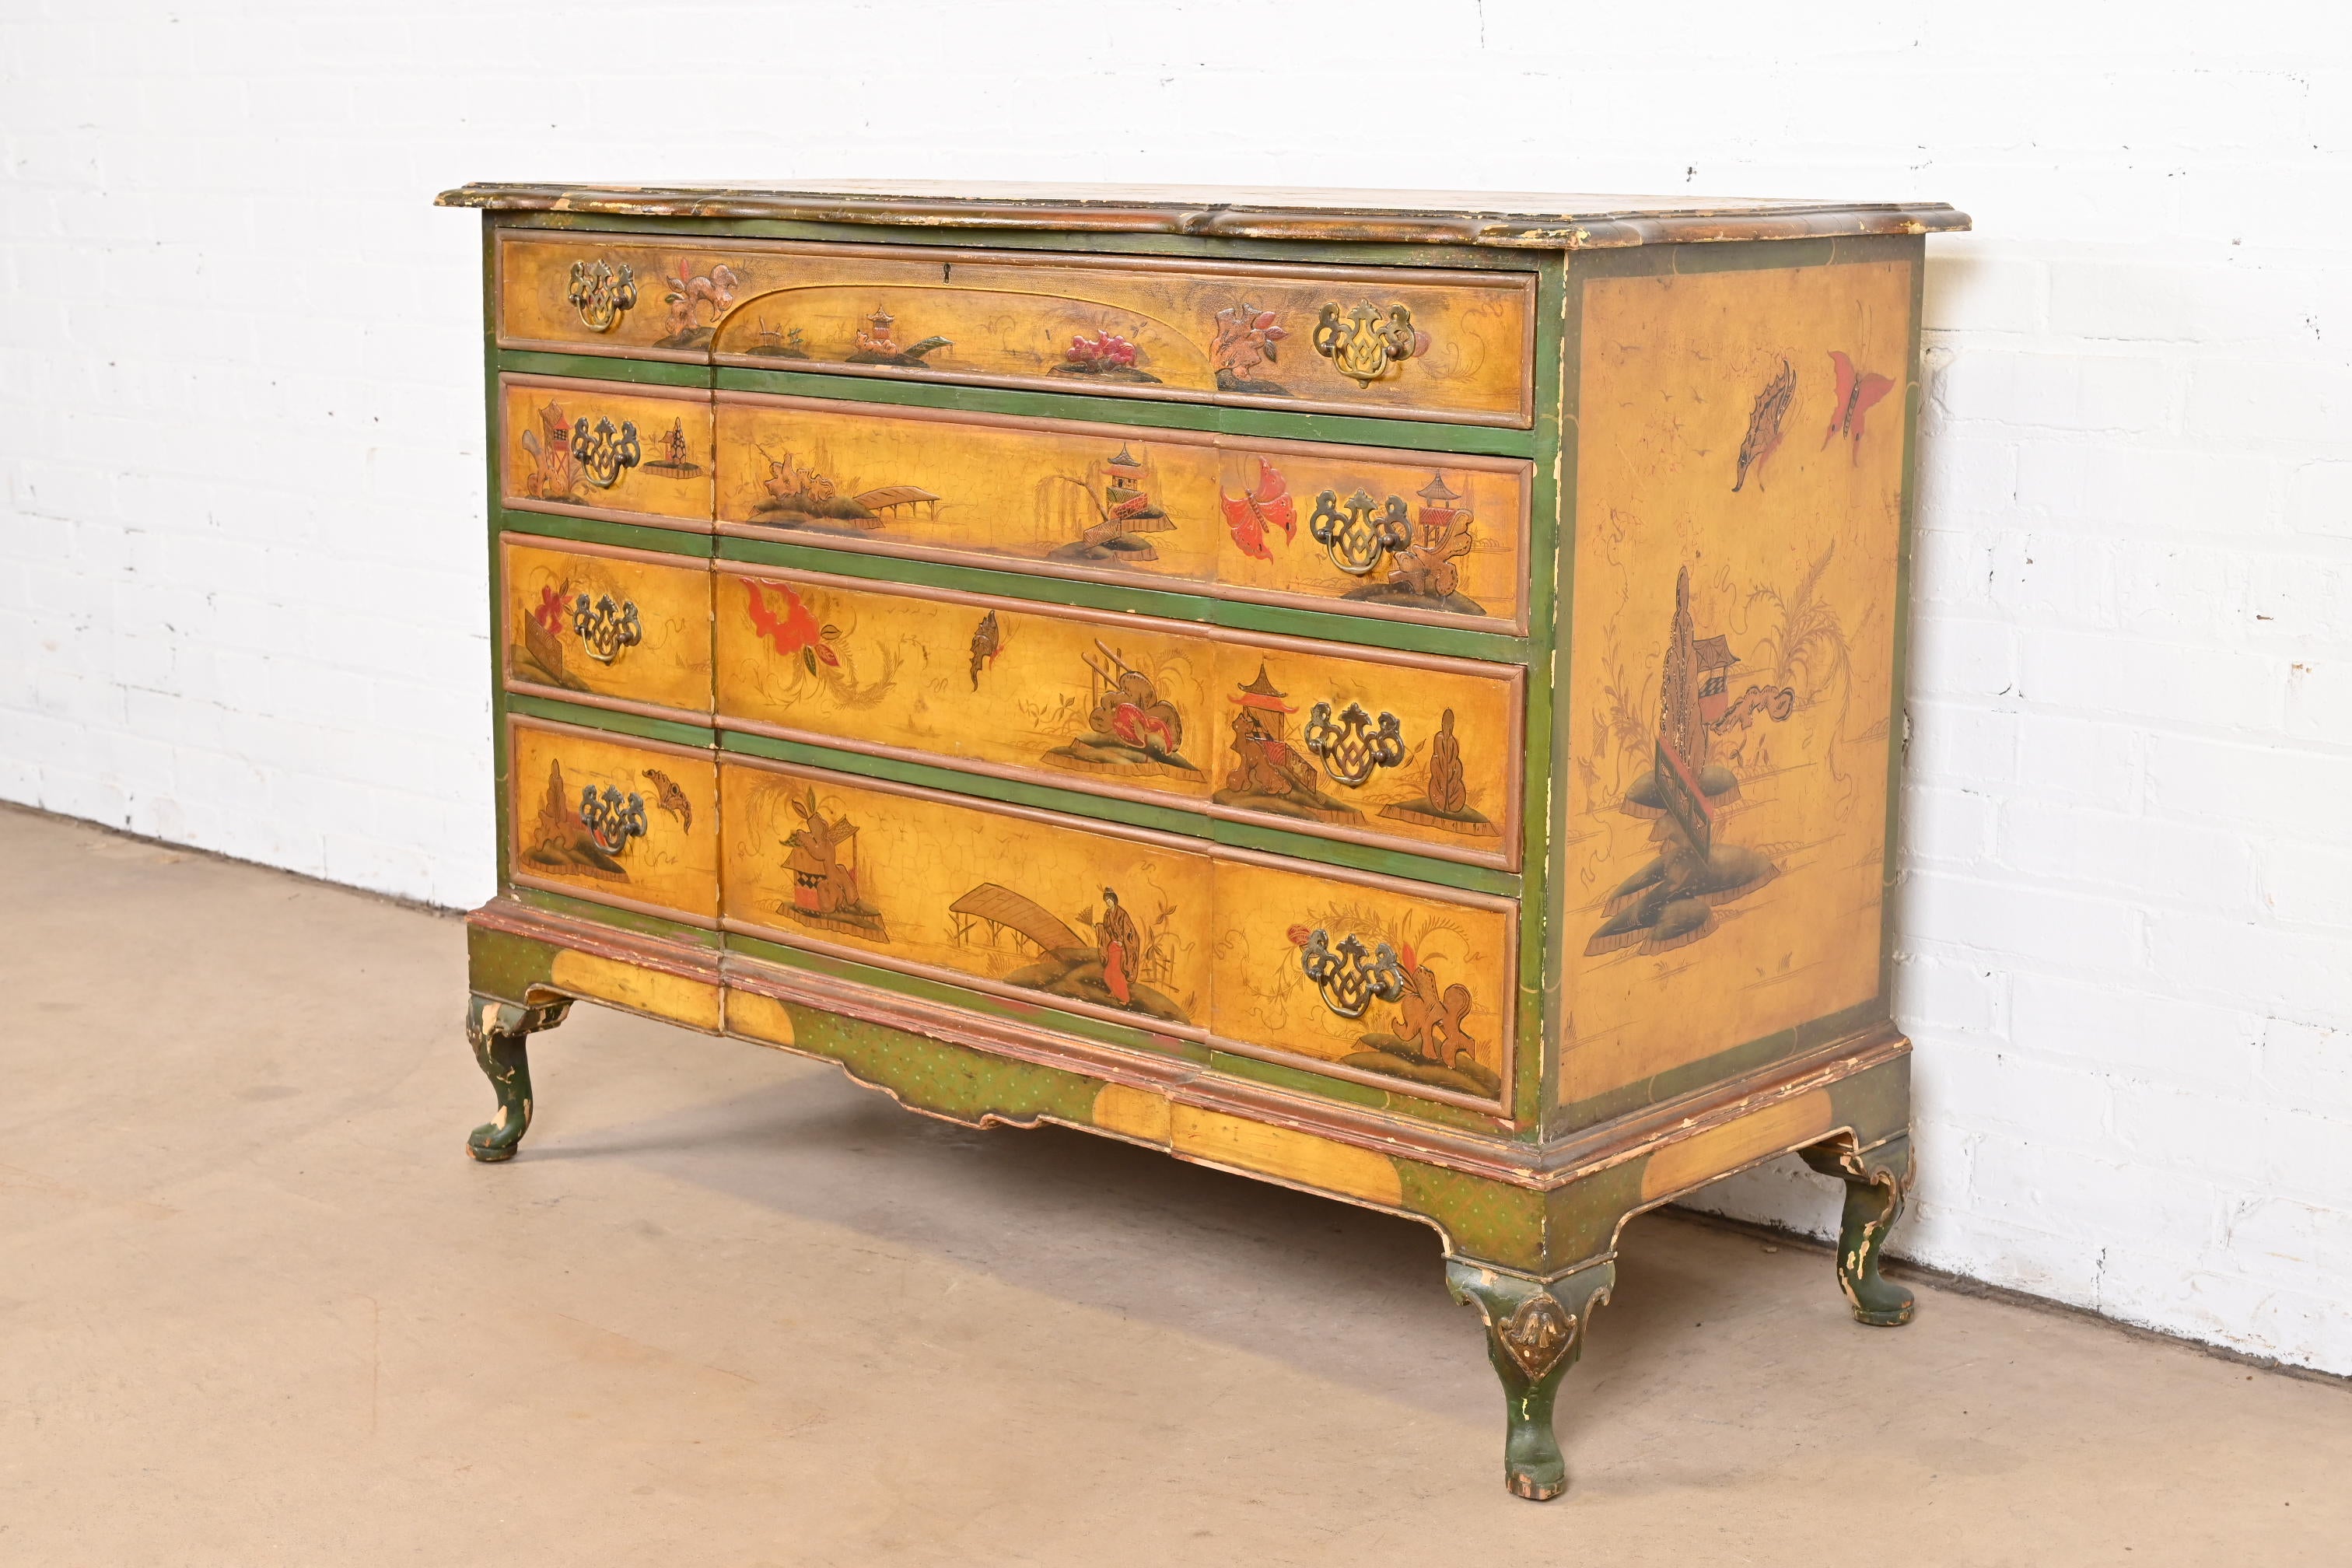 An outstanding Japanned chinoiserie Queen Anne style dresser or chest of drawers

Procured from the Historic Edgecroft Mansion in River Edge, NJ

Made by The Company of Master Craftsmen

USA, circa 1920s

Painted with chinoiserie scenes,